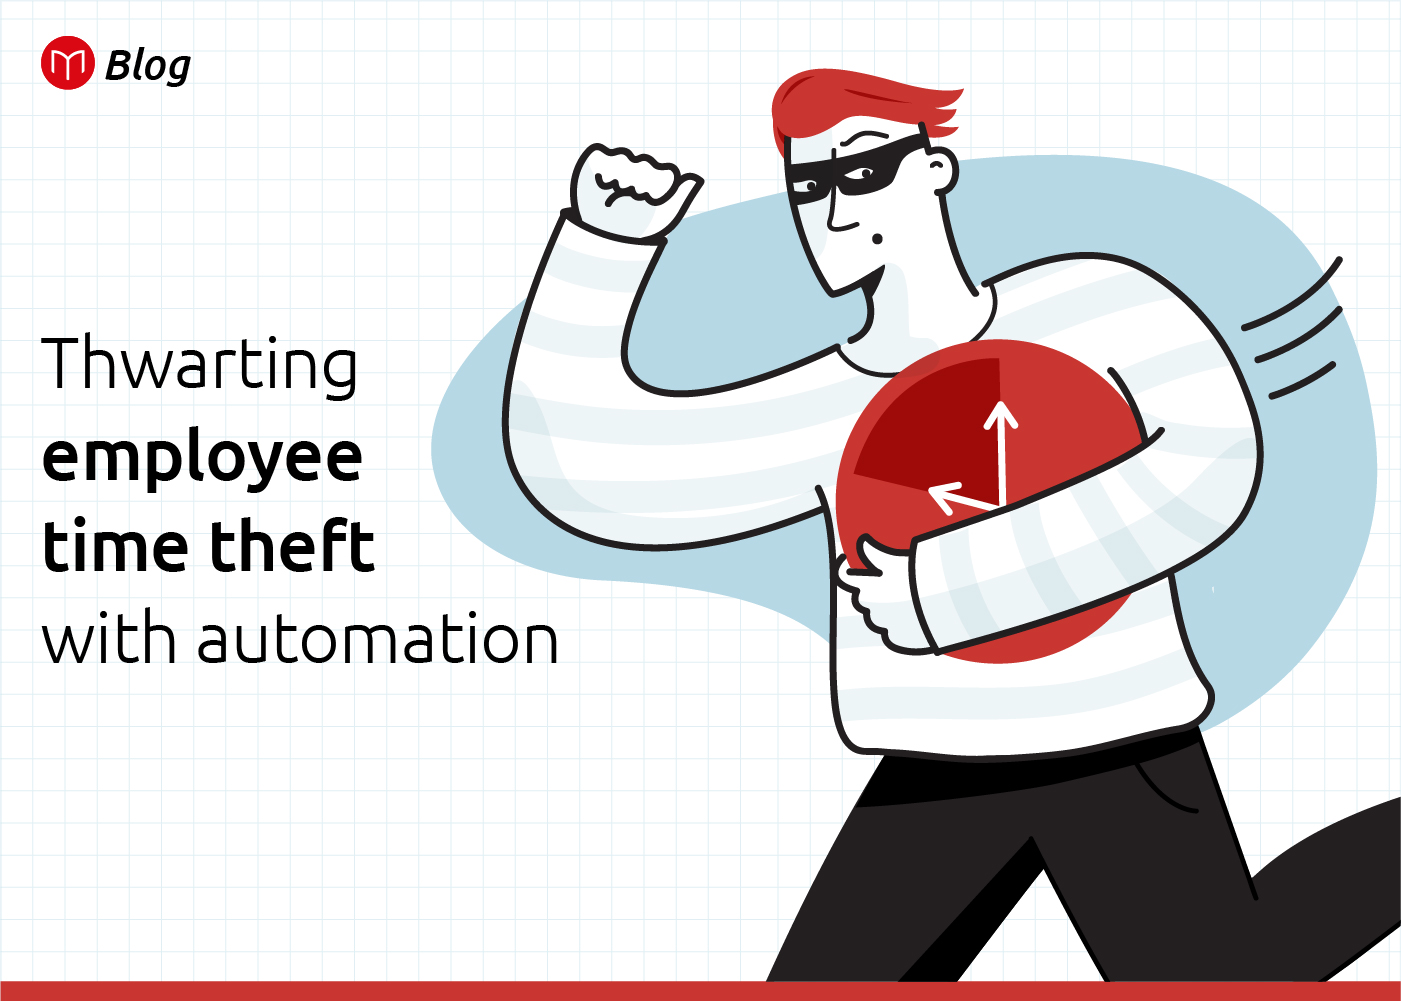 Thwarting employee time theft with automation